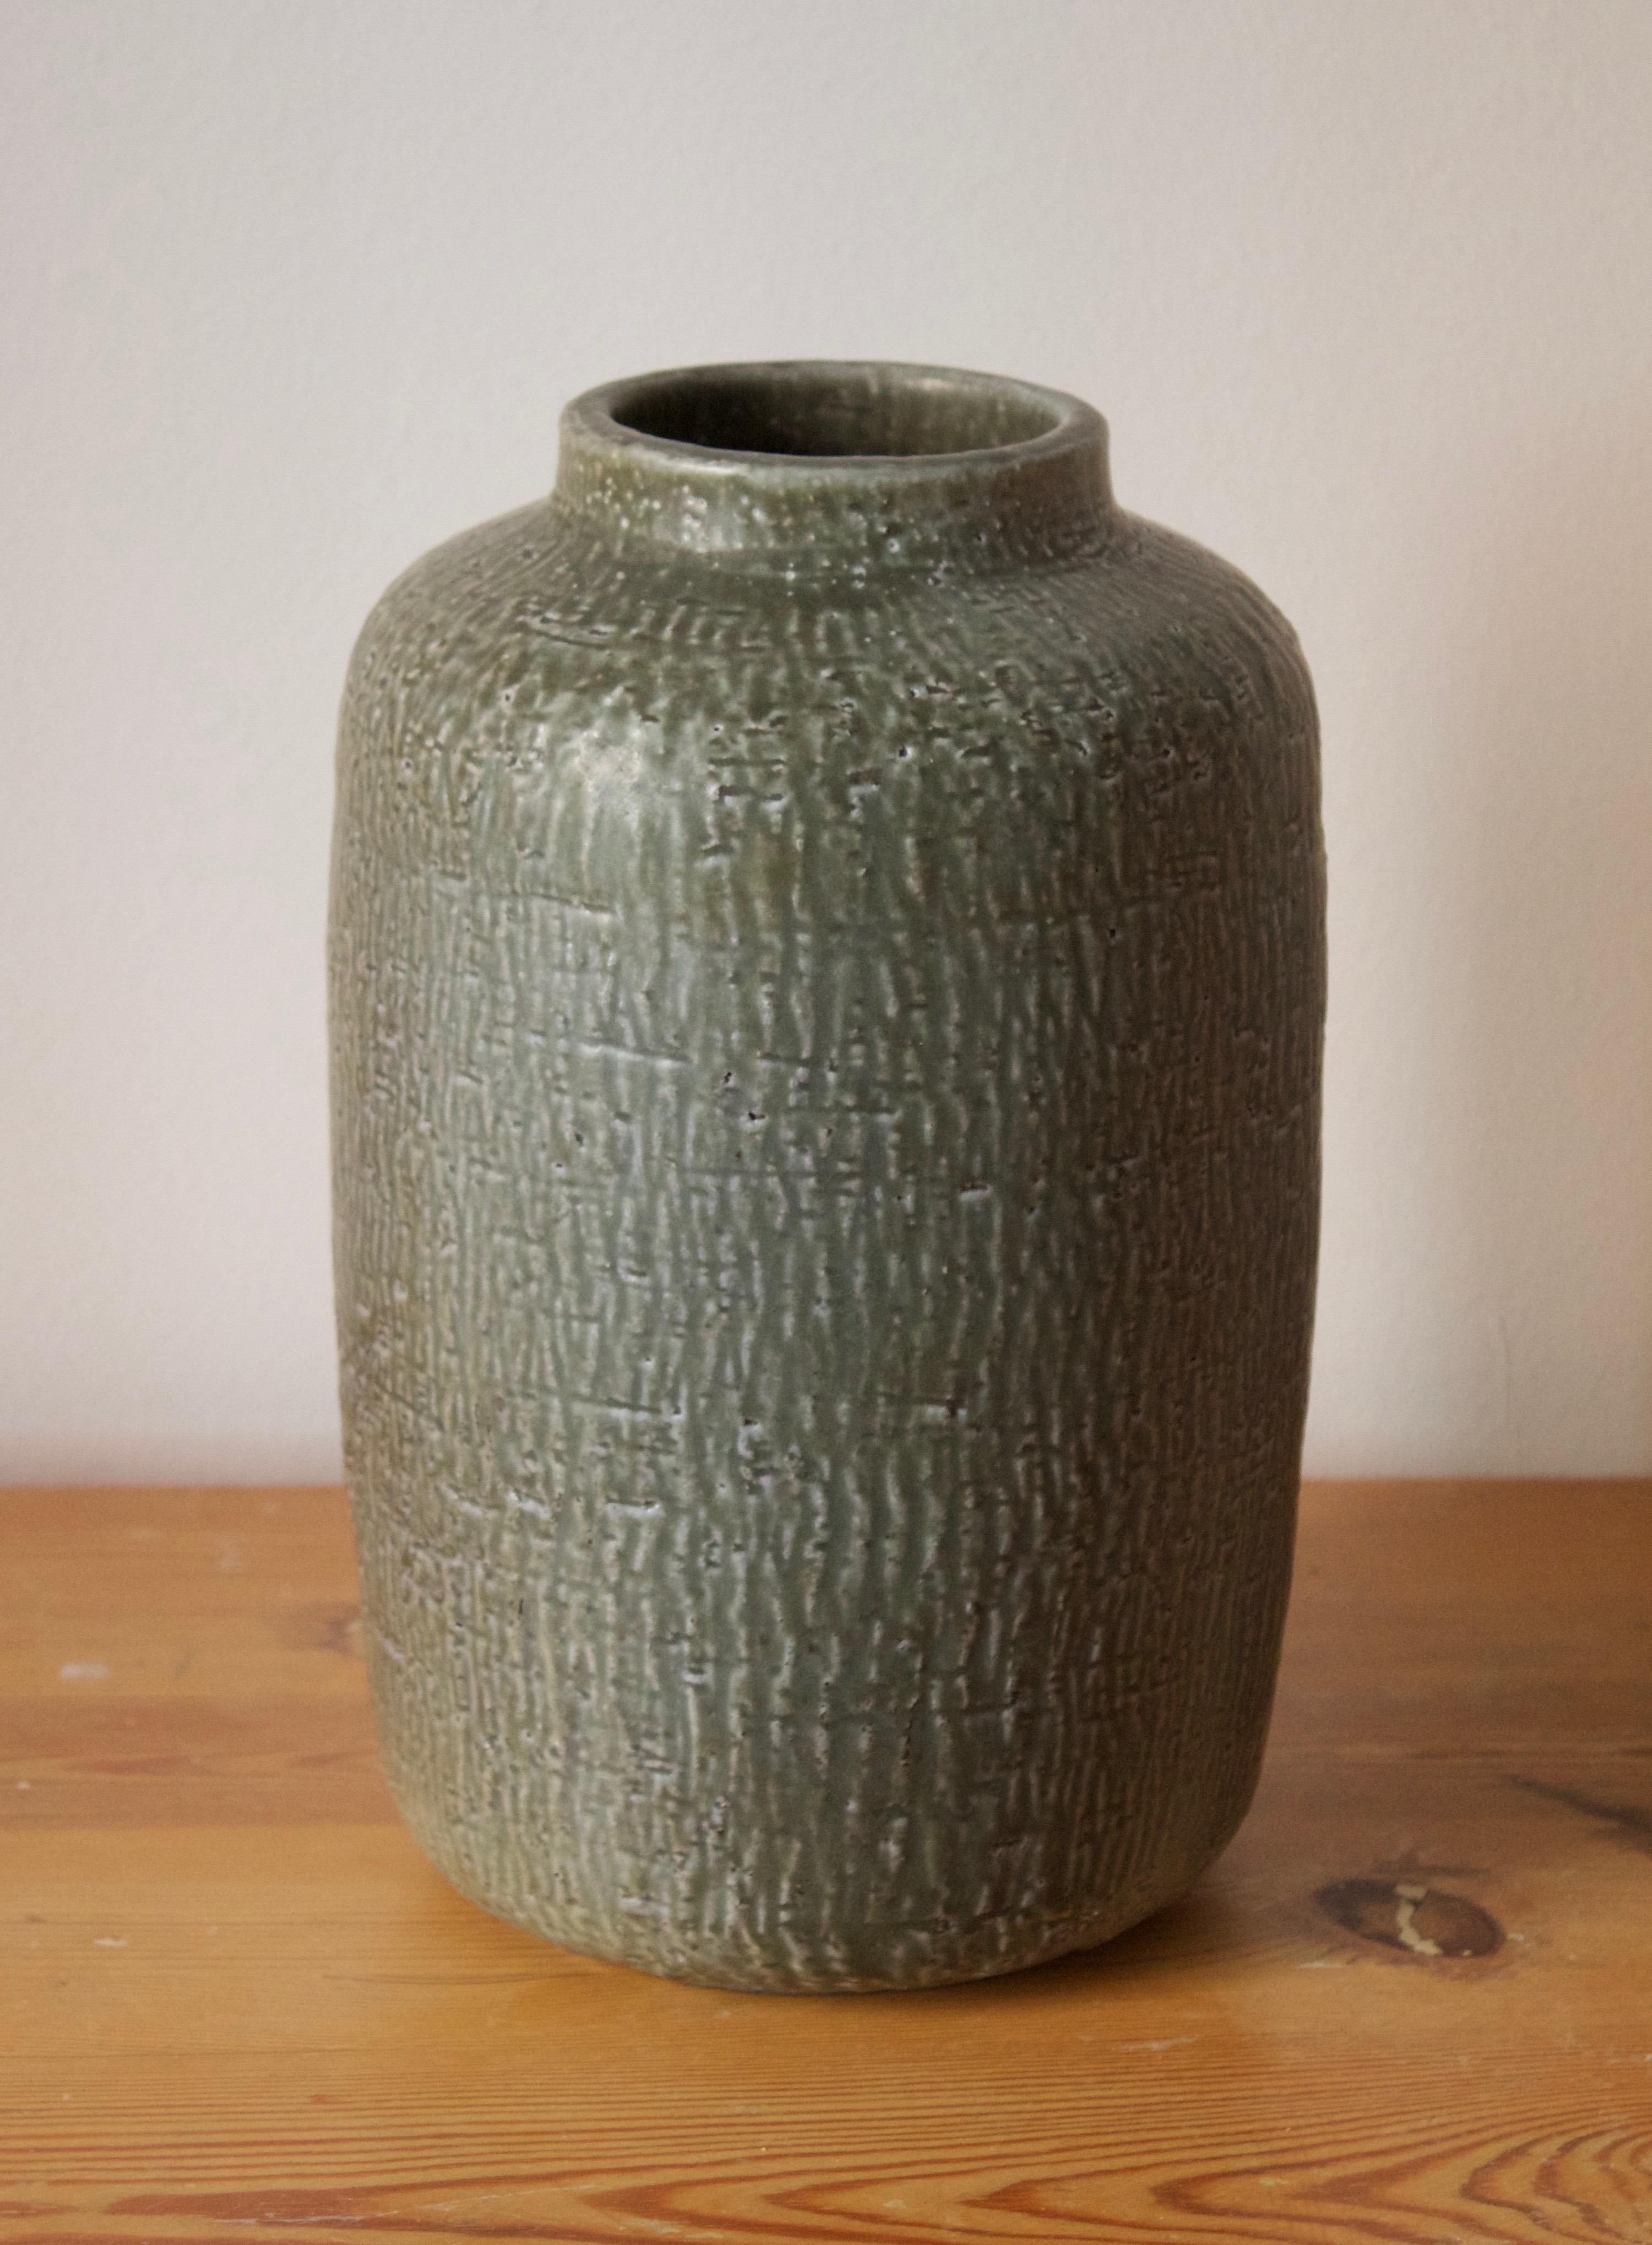 A large vase produced by Nymølle, Denmark, c. 1960s. Designed by Gunnar Nylund, (Swedish, 1914-1997). Signed.

Nylund served as artistic director at Rörstrands, where he worked 1931-1955. Prior to his work at Rörstrand he was a well-established